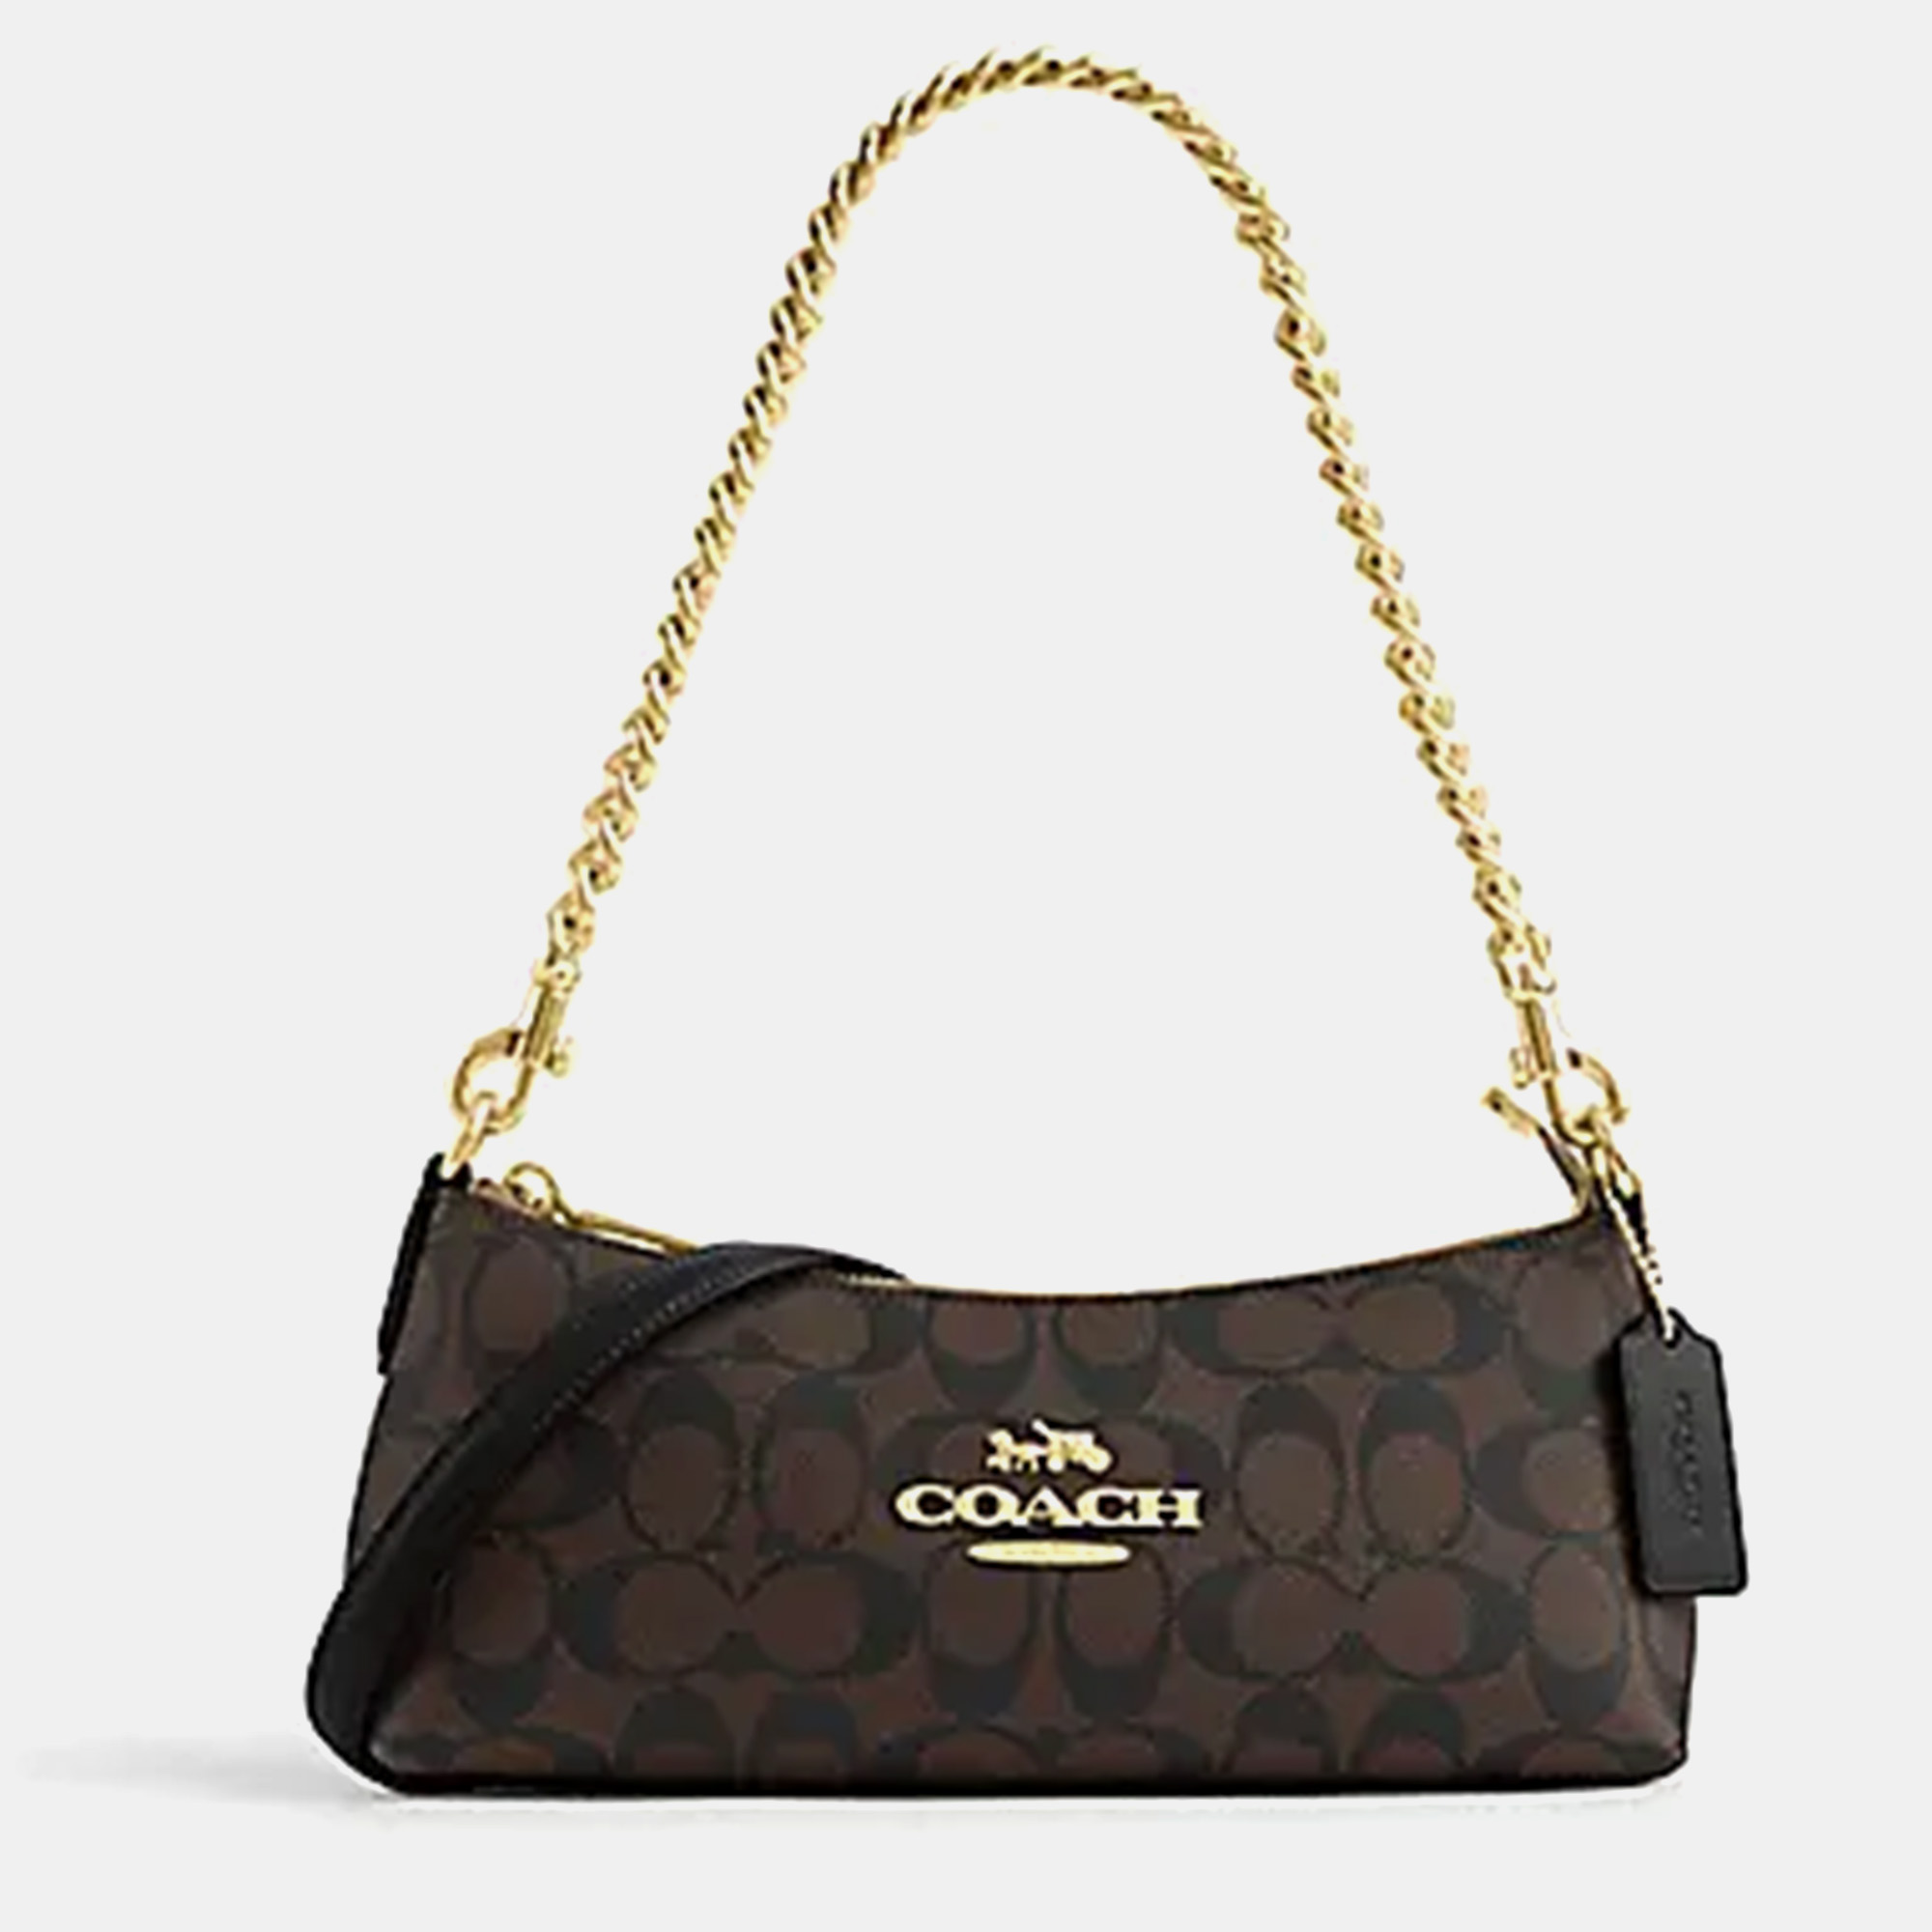 Coach Khaki / Brown / Leather And Signature Coated Canvas / Charlotte Shoulder Bag